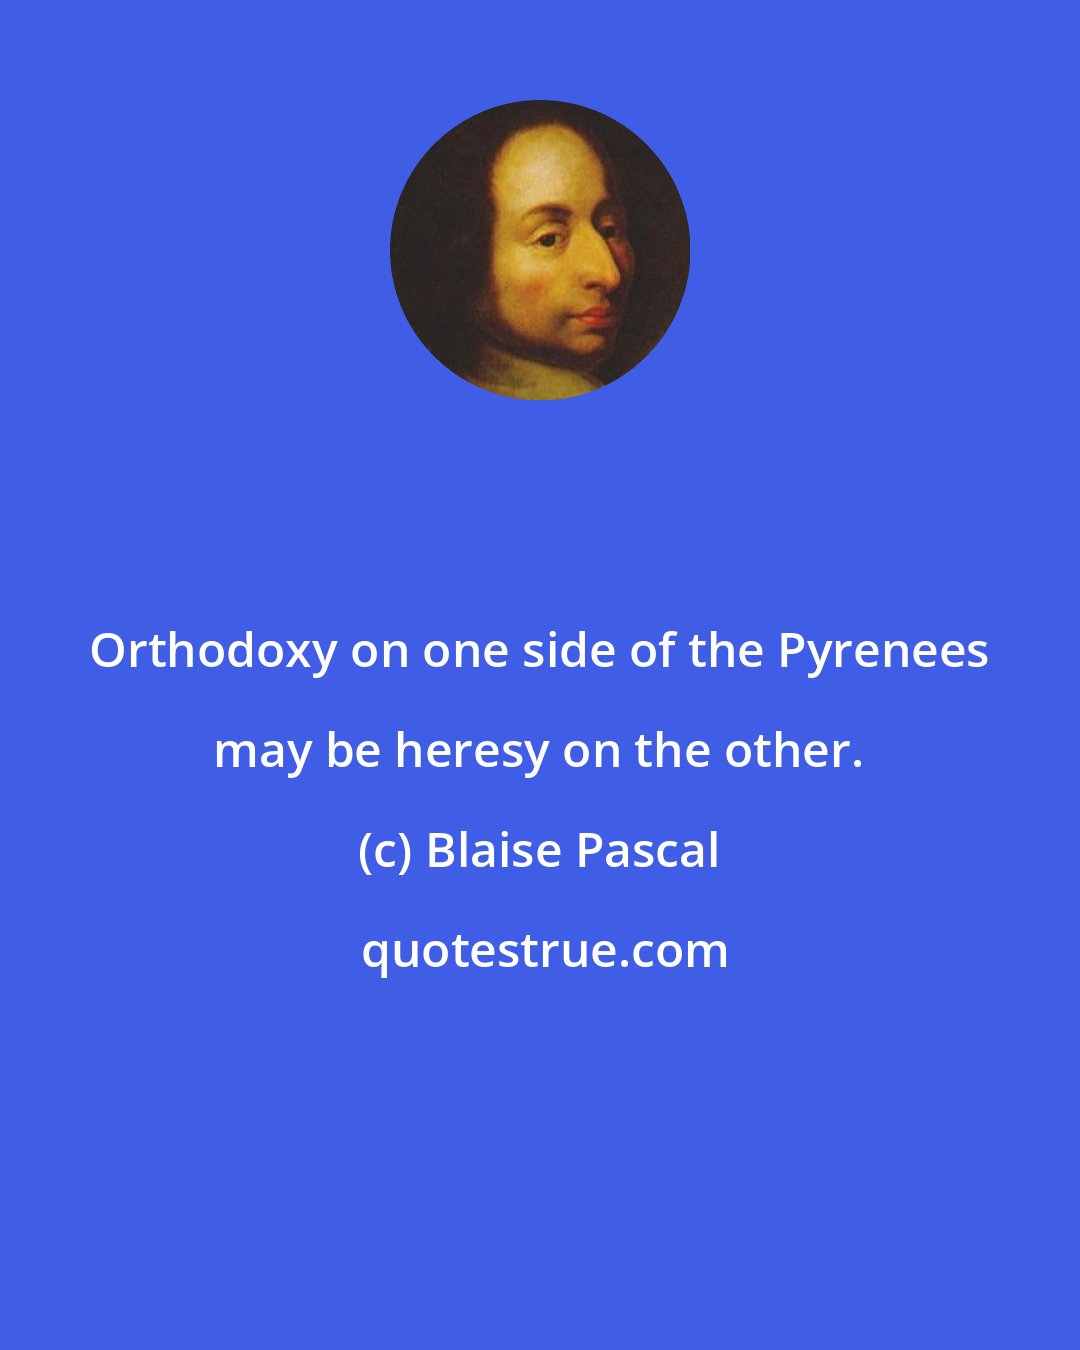 Blaise Pascal: Orthodoxy on one side of the Pyrenees may be heresy on the other.